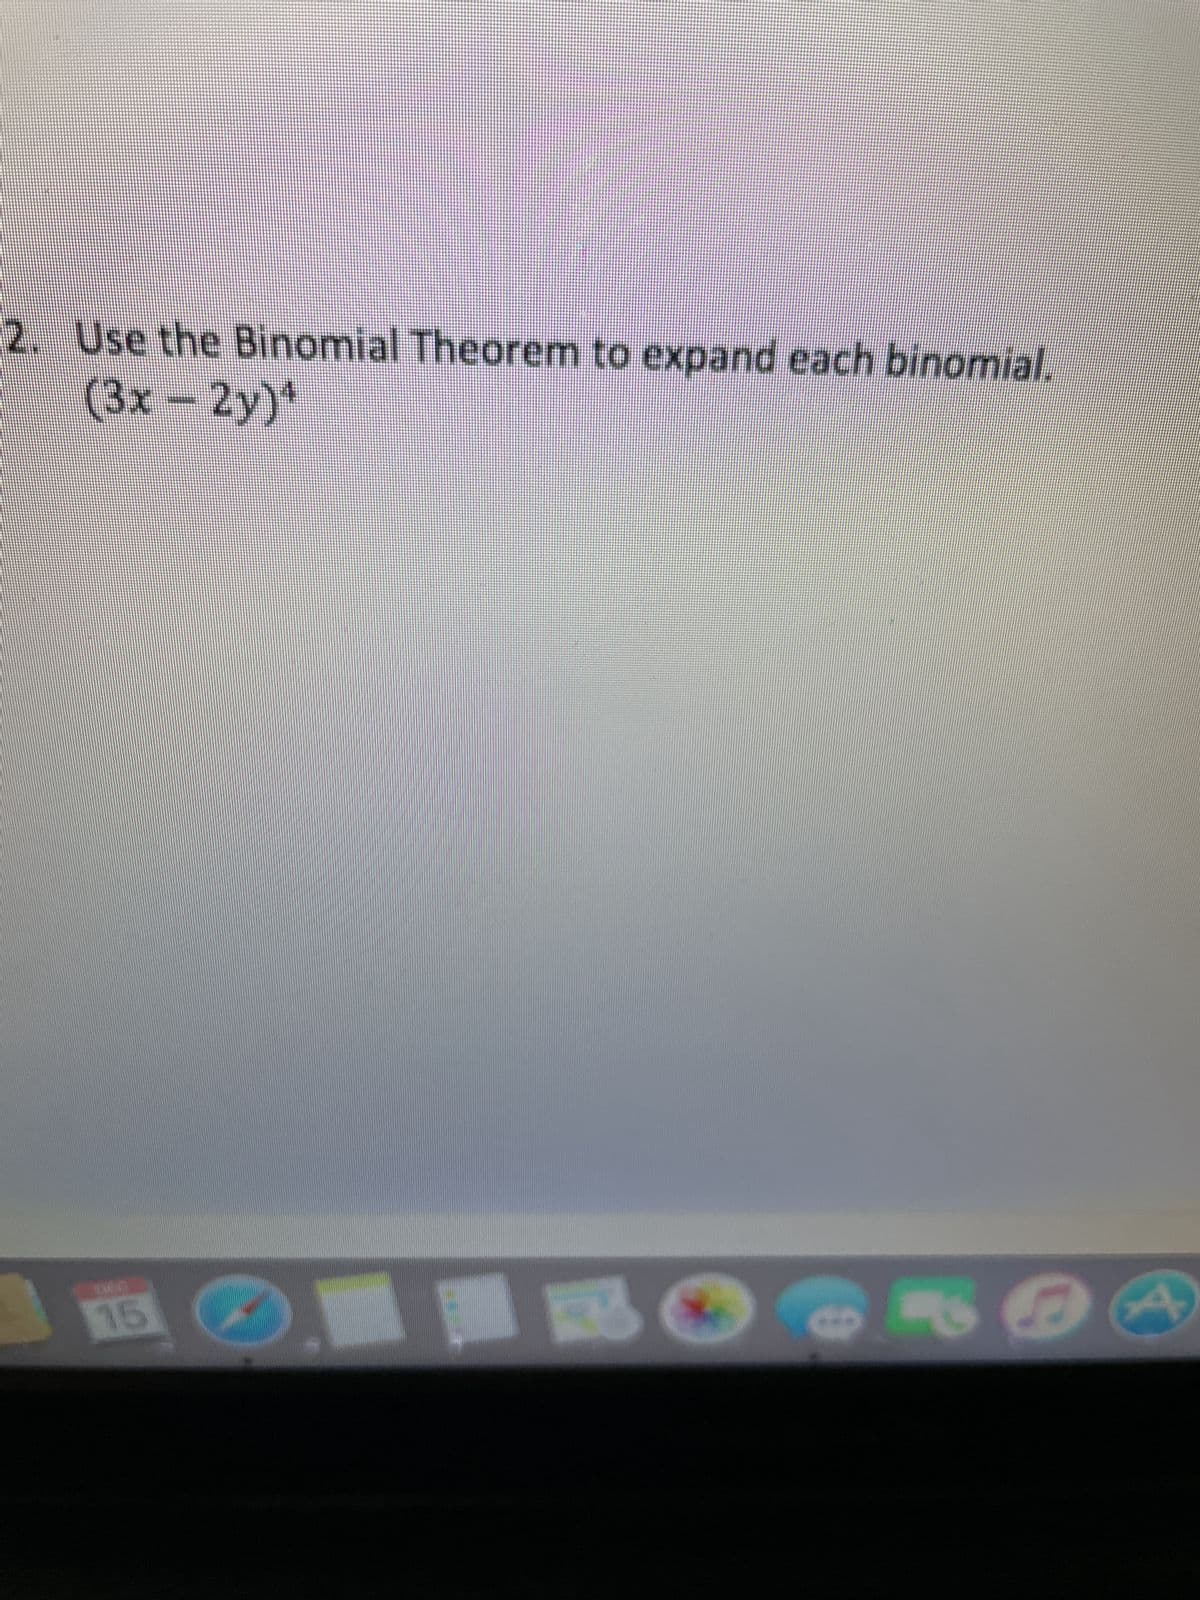 2. Use the Binomial Theorem to expand each binomial.
(3x – 2y)4
460
15
t
B
4